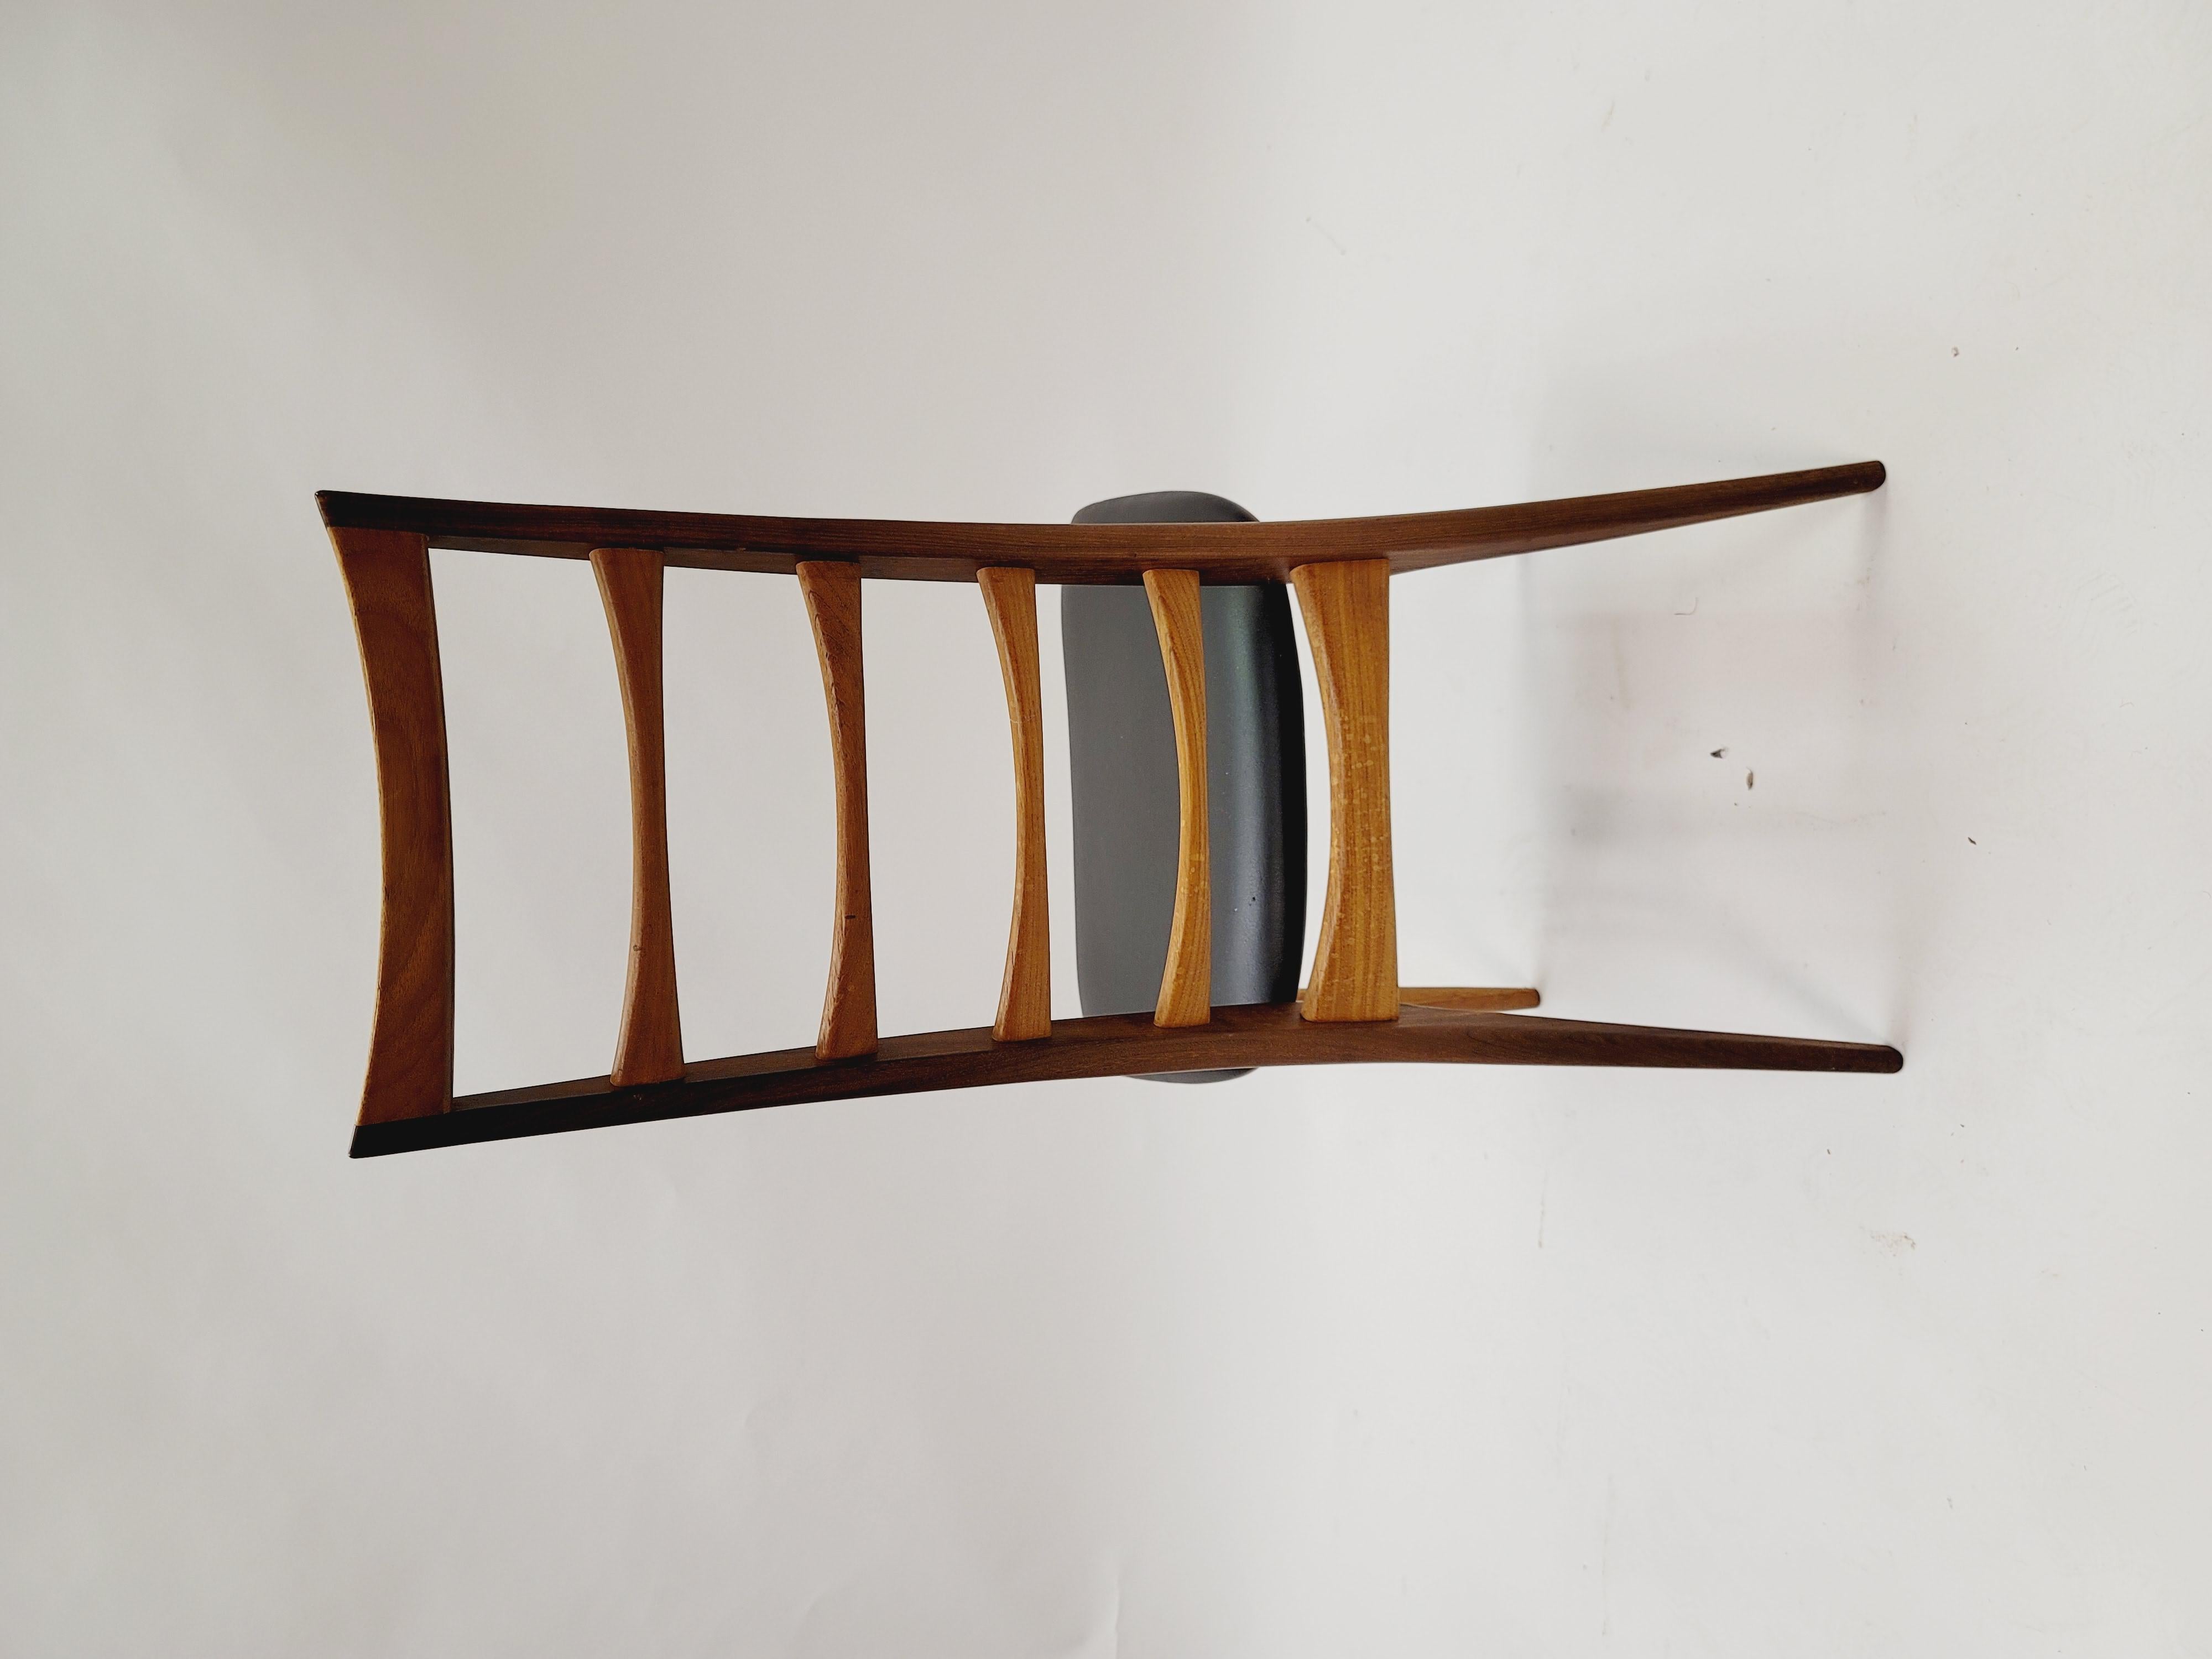 This set of four Danish teak dining chairs with black upholstery were dressings by Neils Koefoed for Koefoeds Hornslet. The chairs are stamped on the underside.